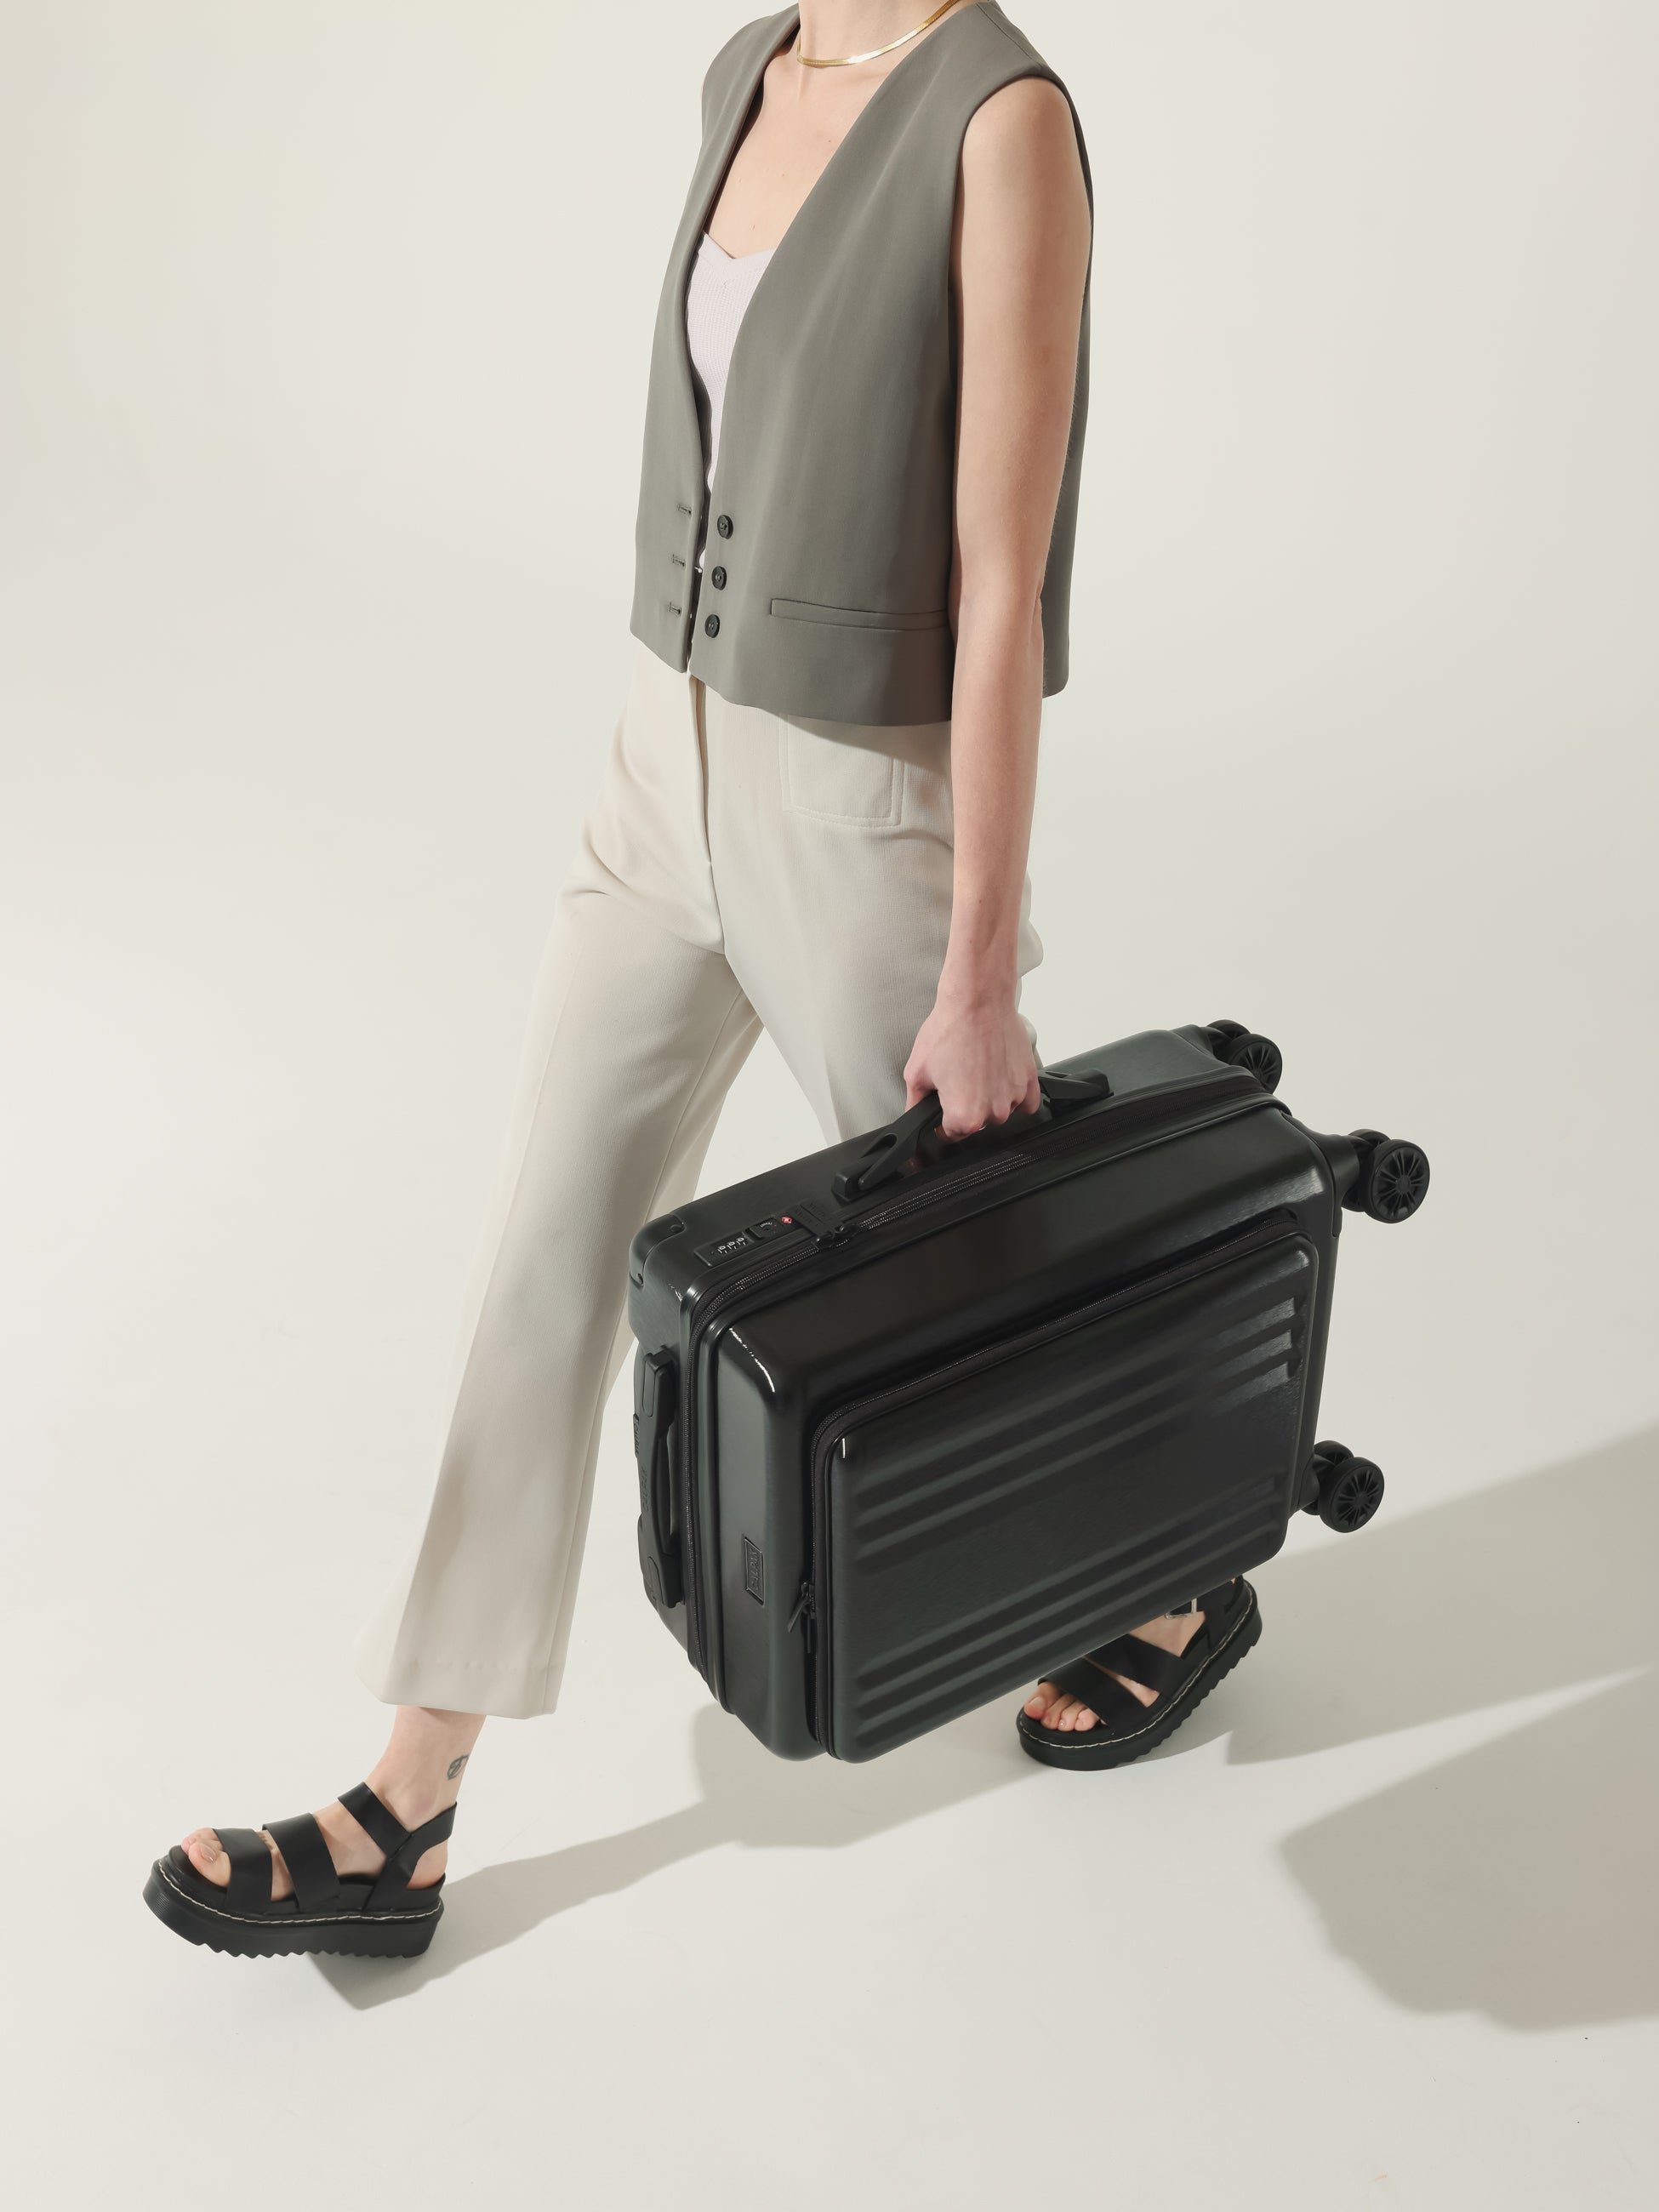 Model carrying CALPAK Ambeur hard shell carry-on with front pocket, cushioned top and side handles in black